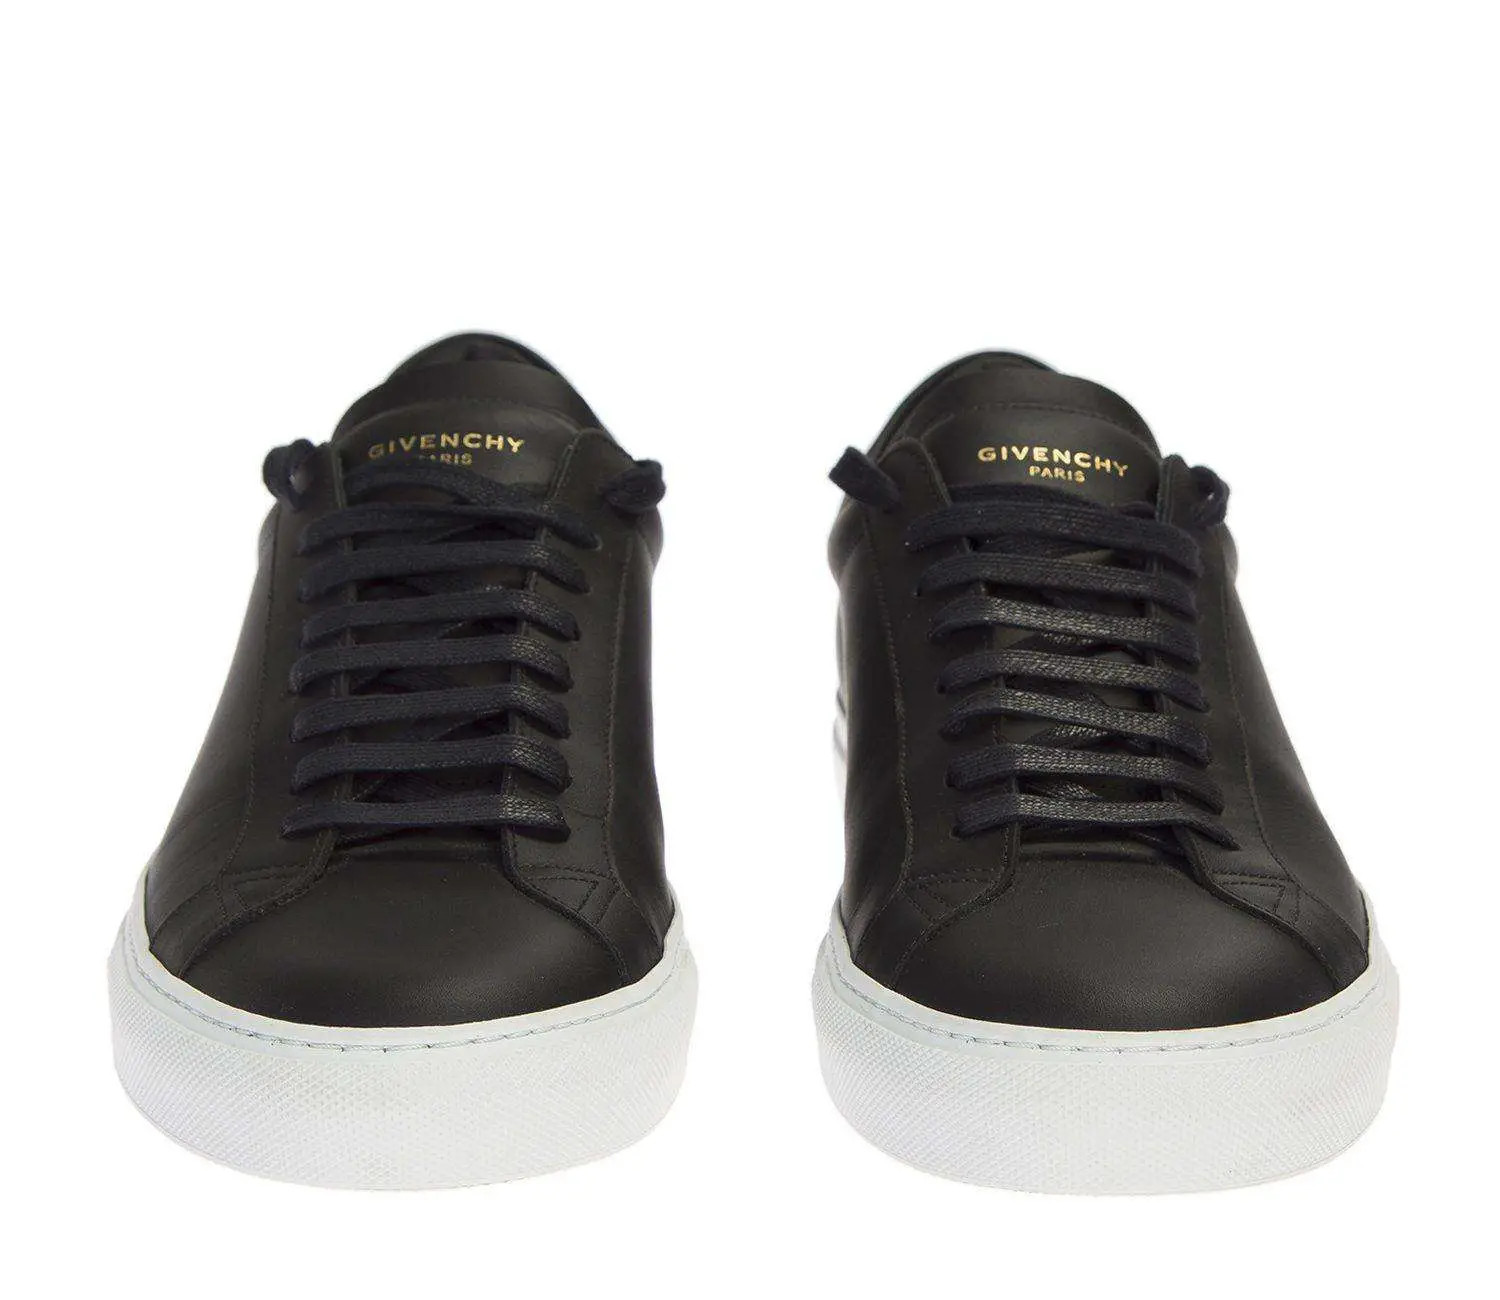 Givenchy Black Leather Sneakers With White Soles for Men ...